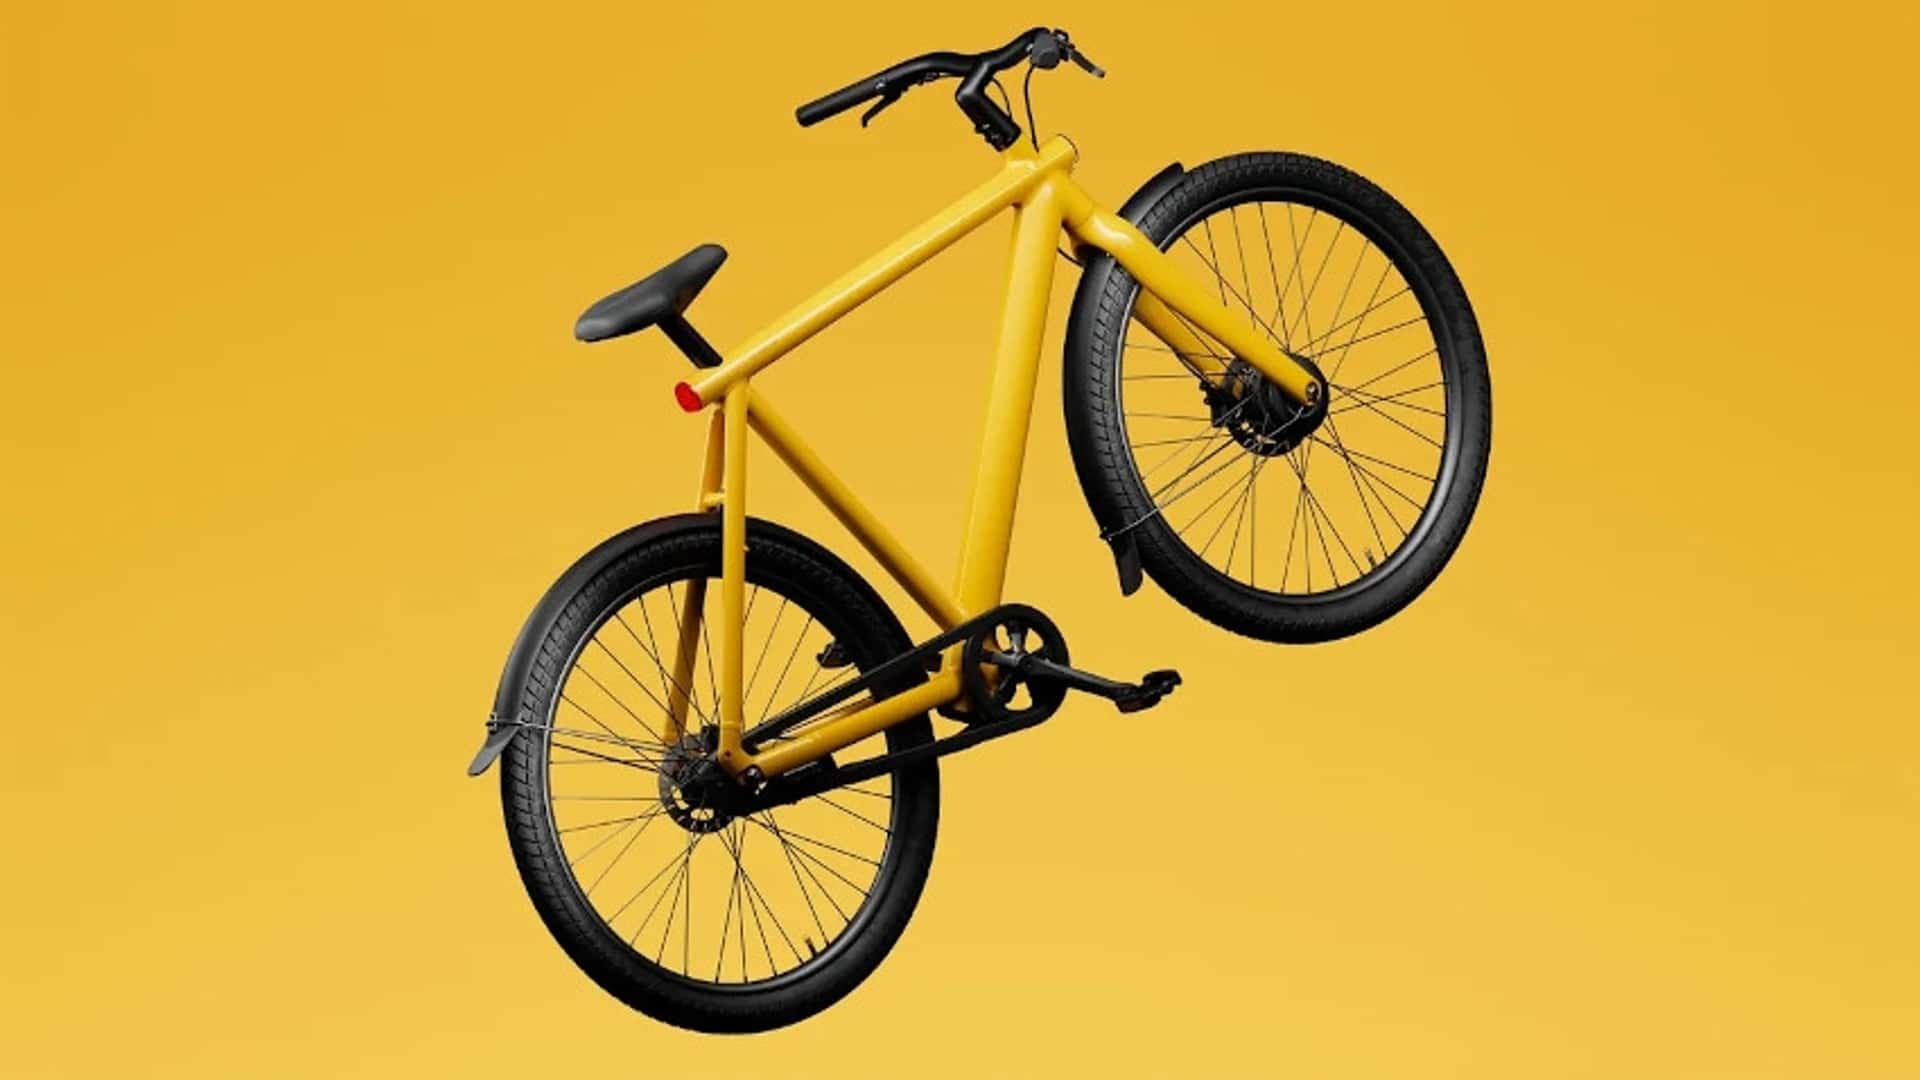 lavoie to revamp vanmoof operations, improve reliability and service